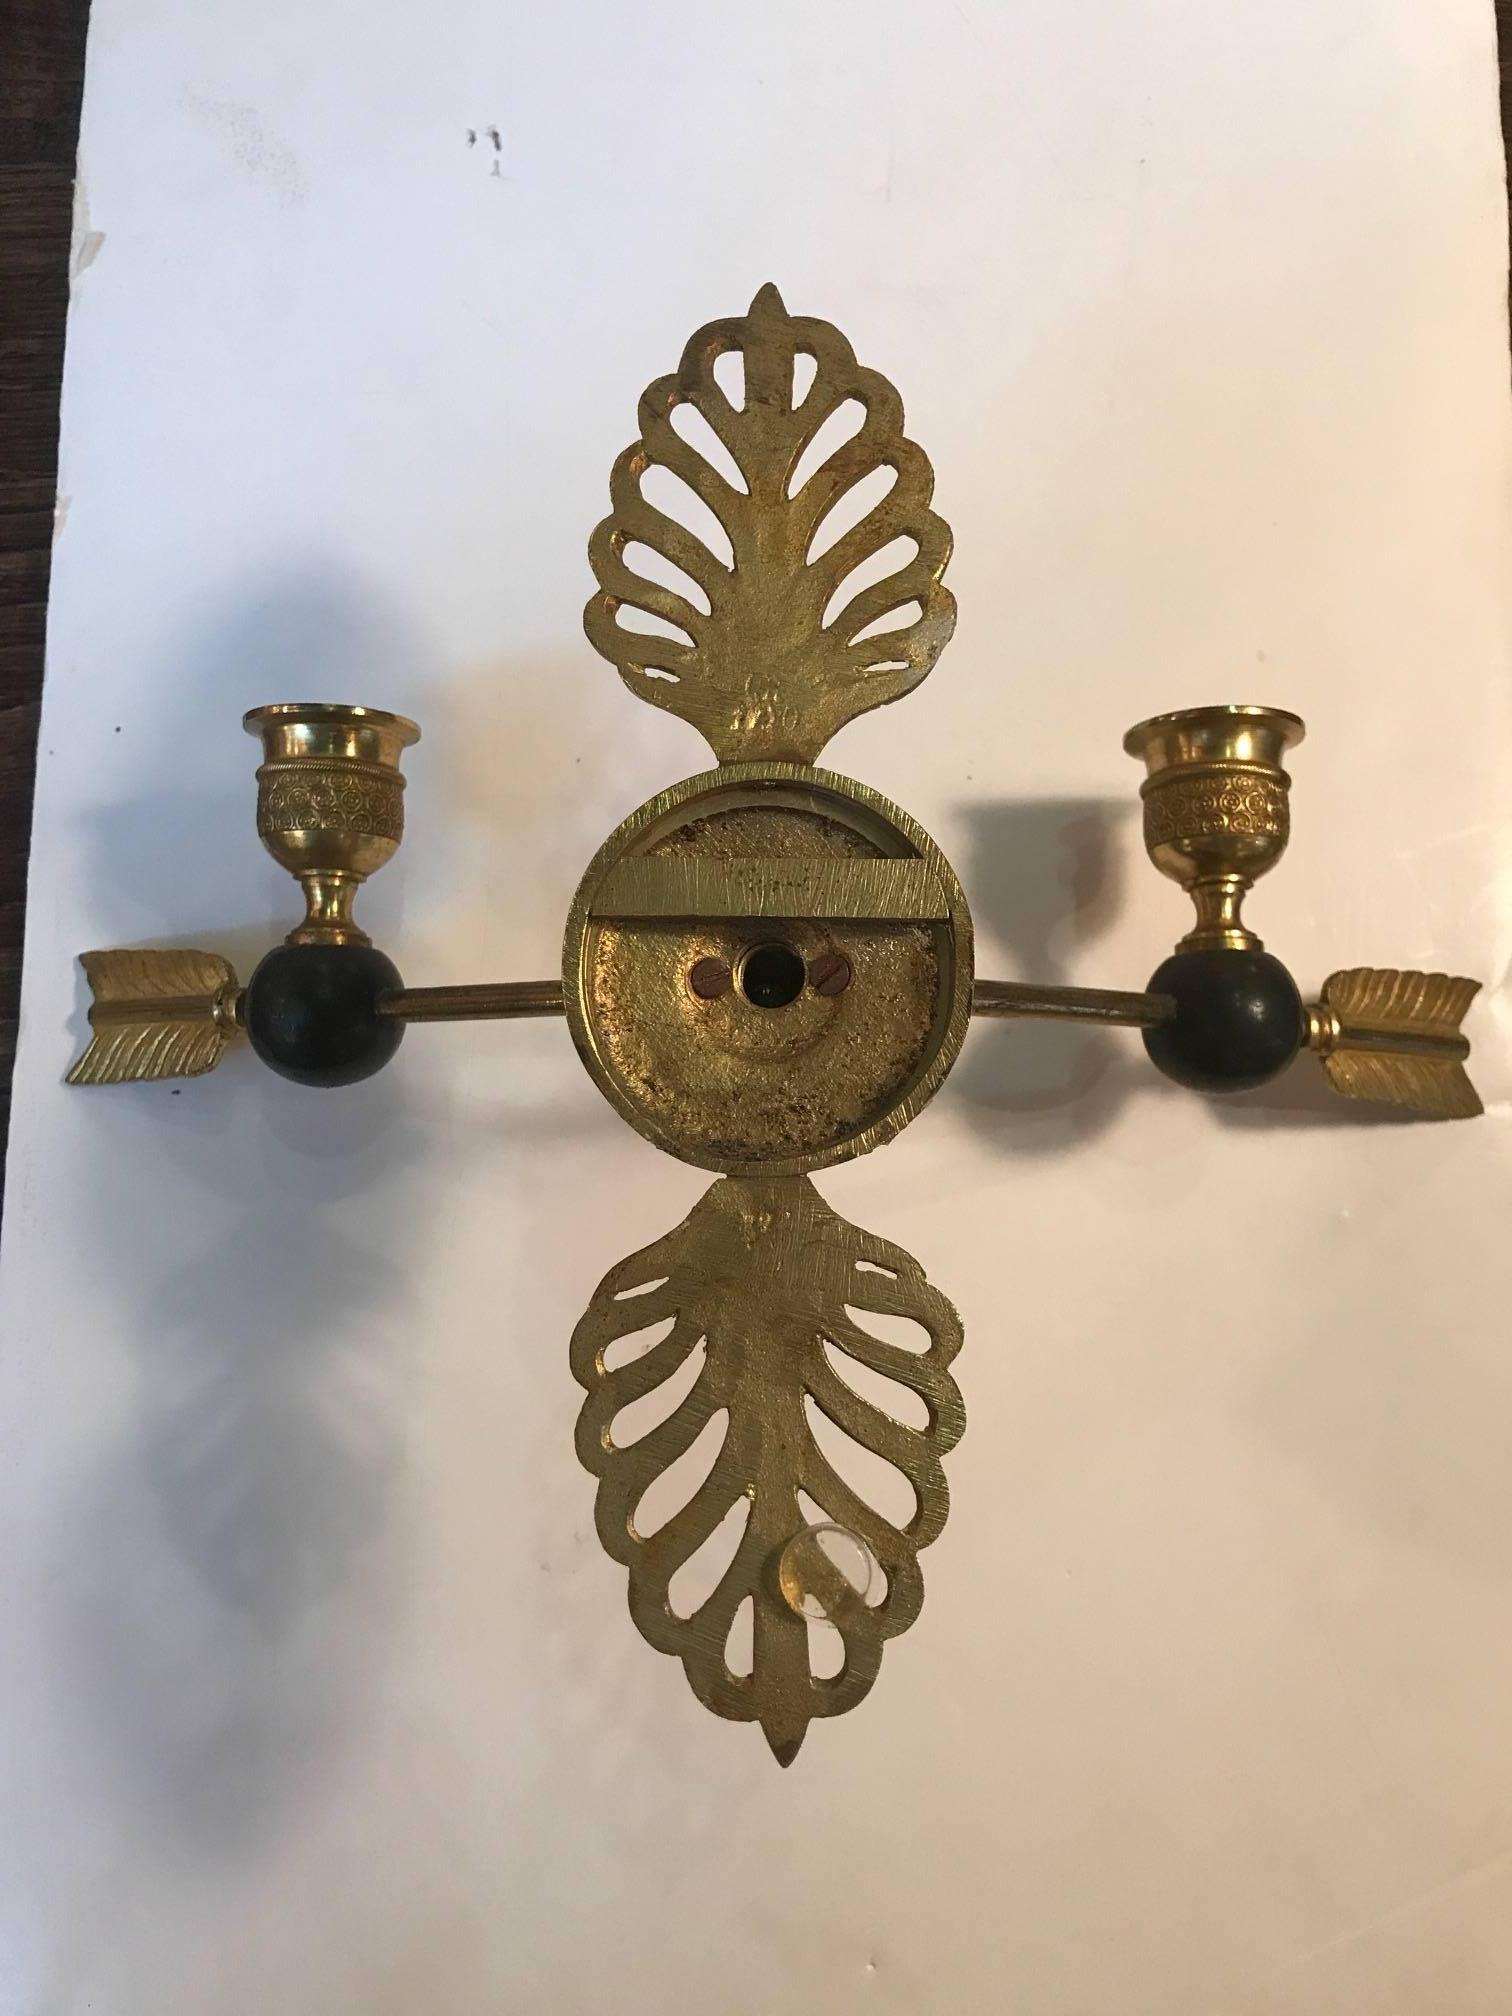 Neoclassical Revival Pair of Gilt and Patinated Bronze Empire Sconces